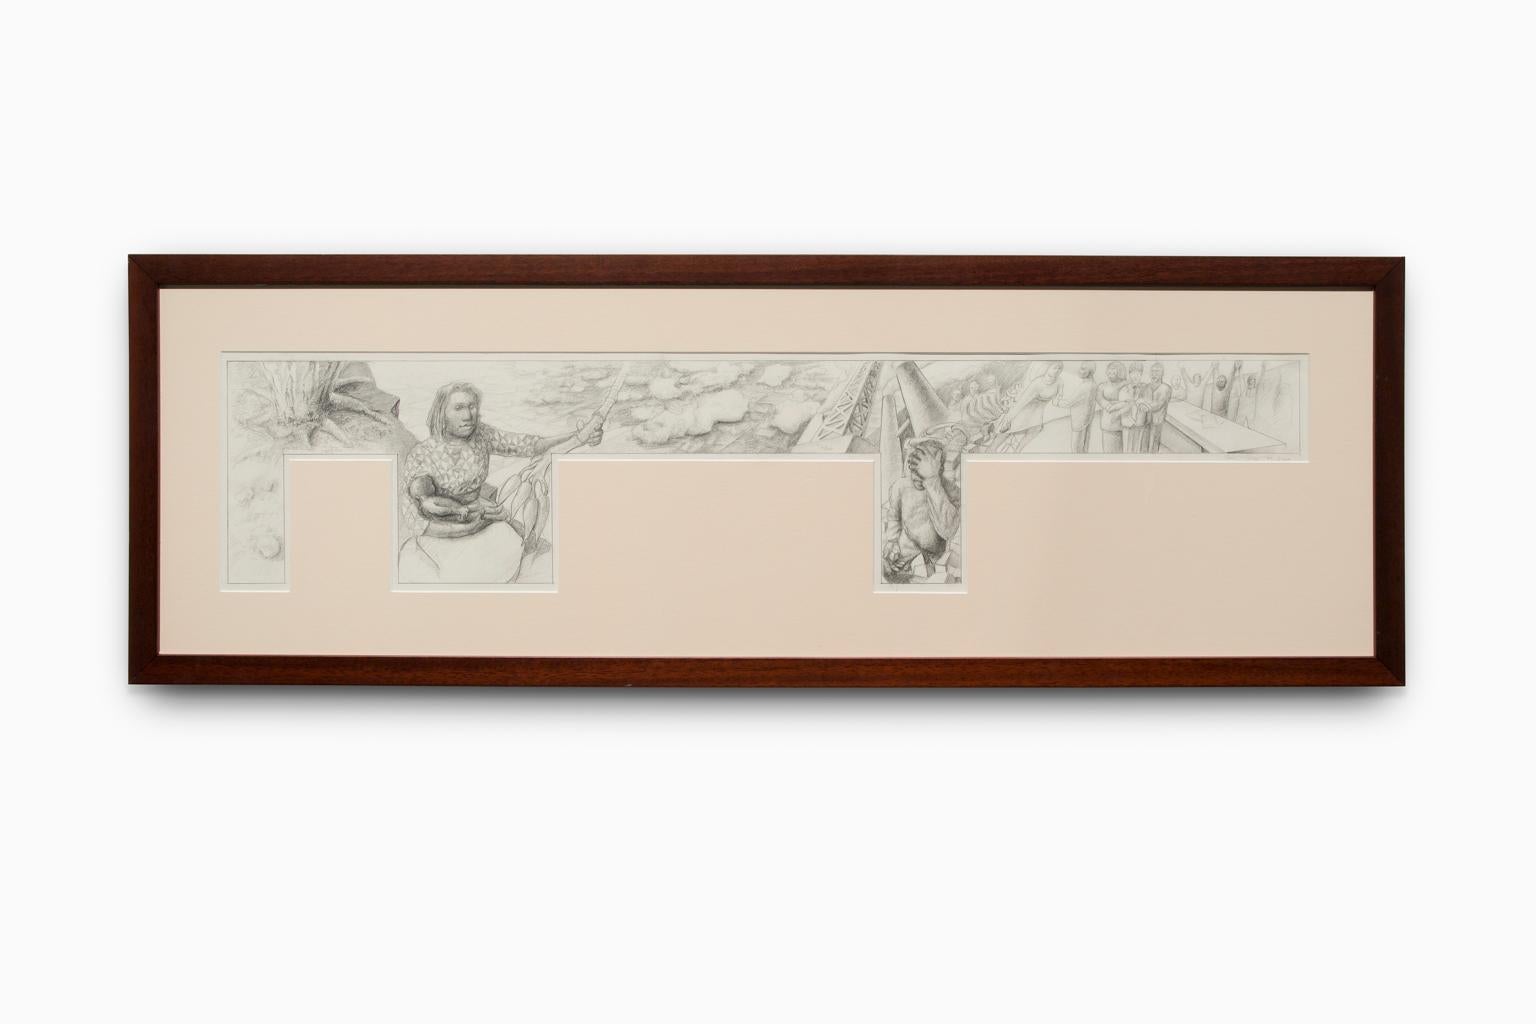 "Earth, Wind, Fire, and Water" Proposal Drawing for Mural, Figurative, Pencil - Art by Hubert Massey